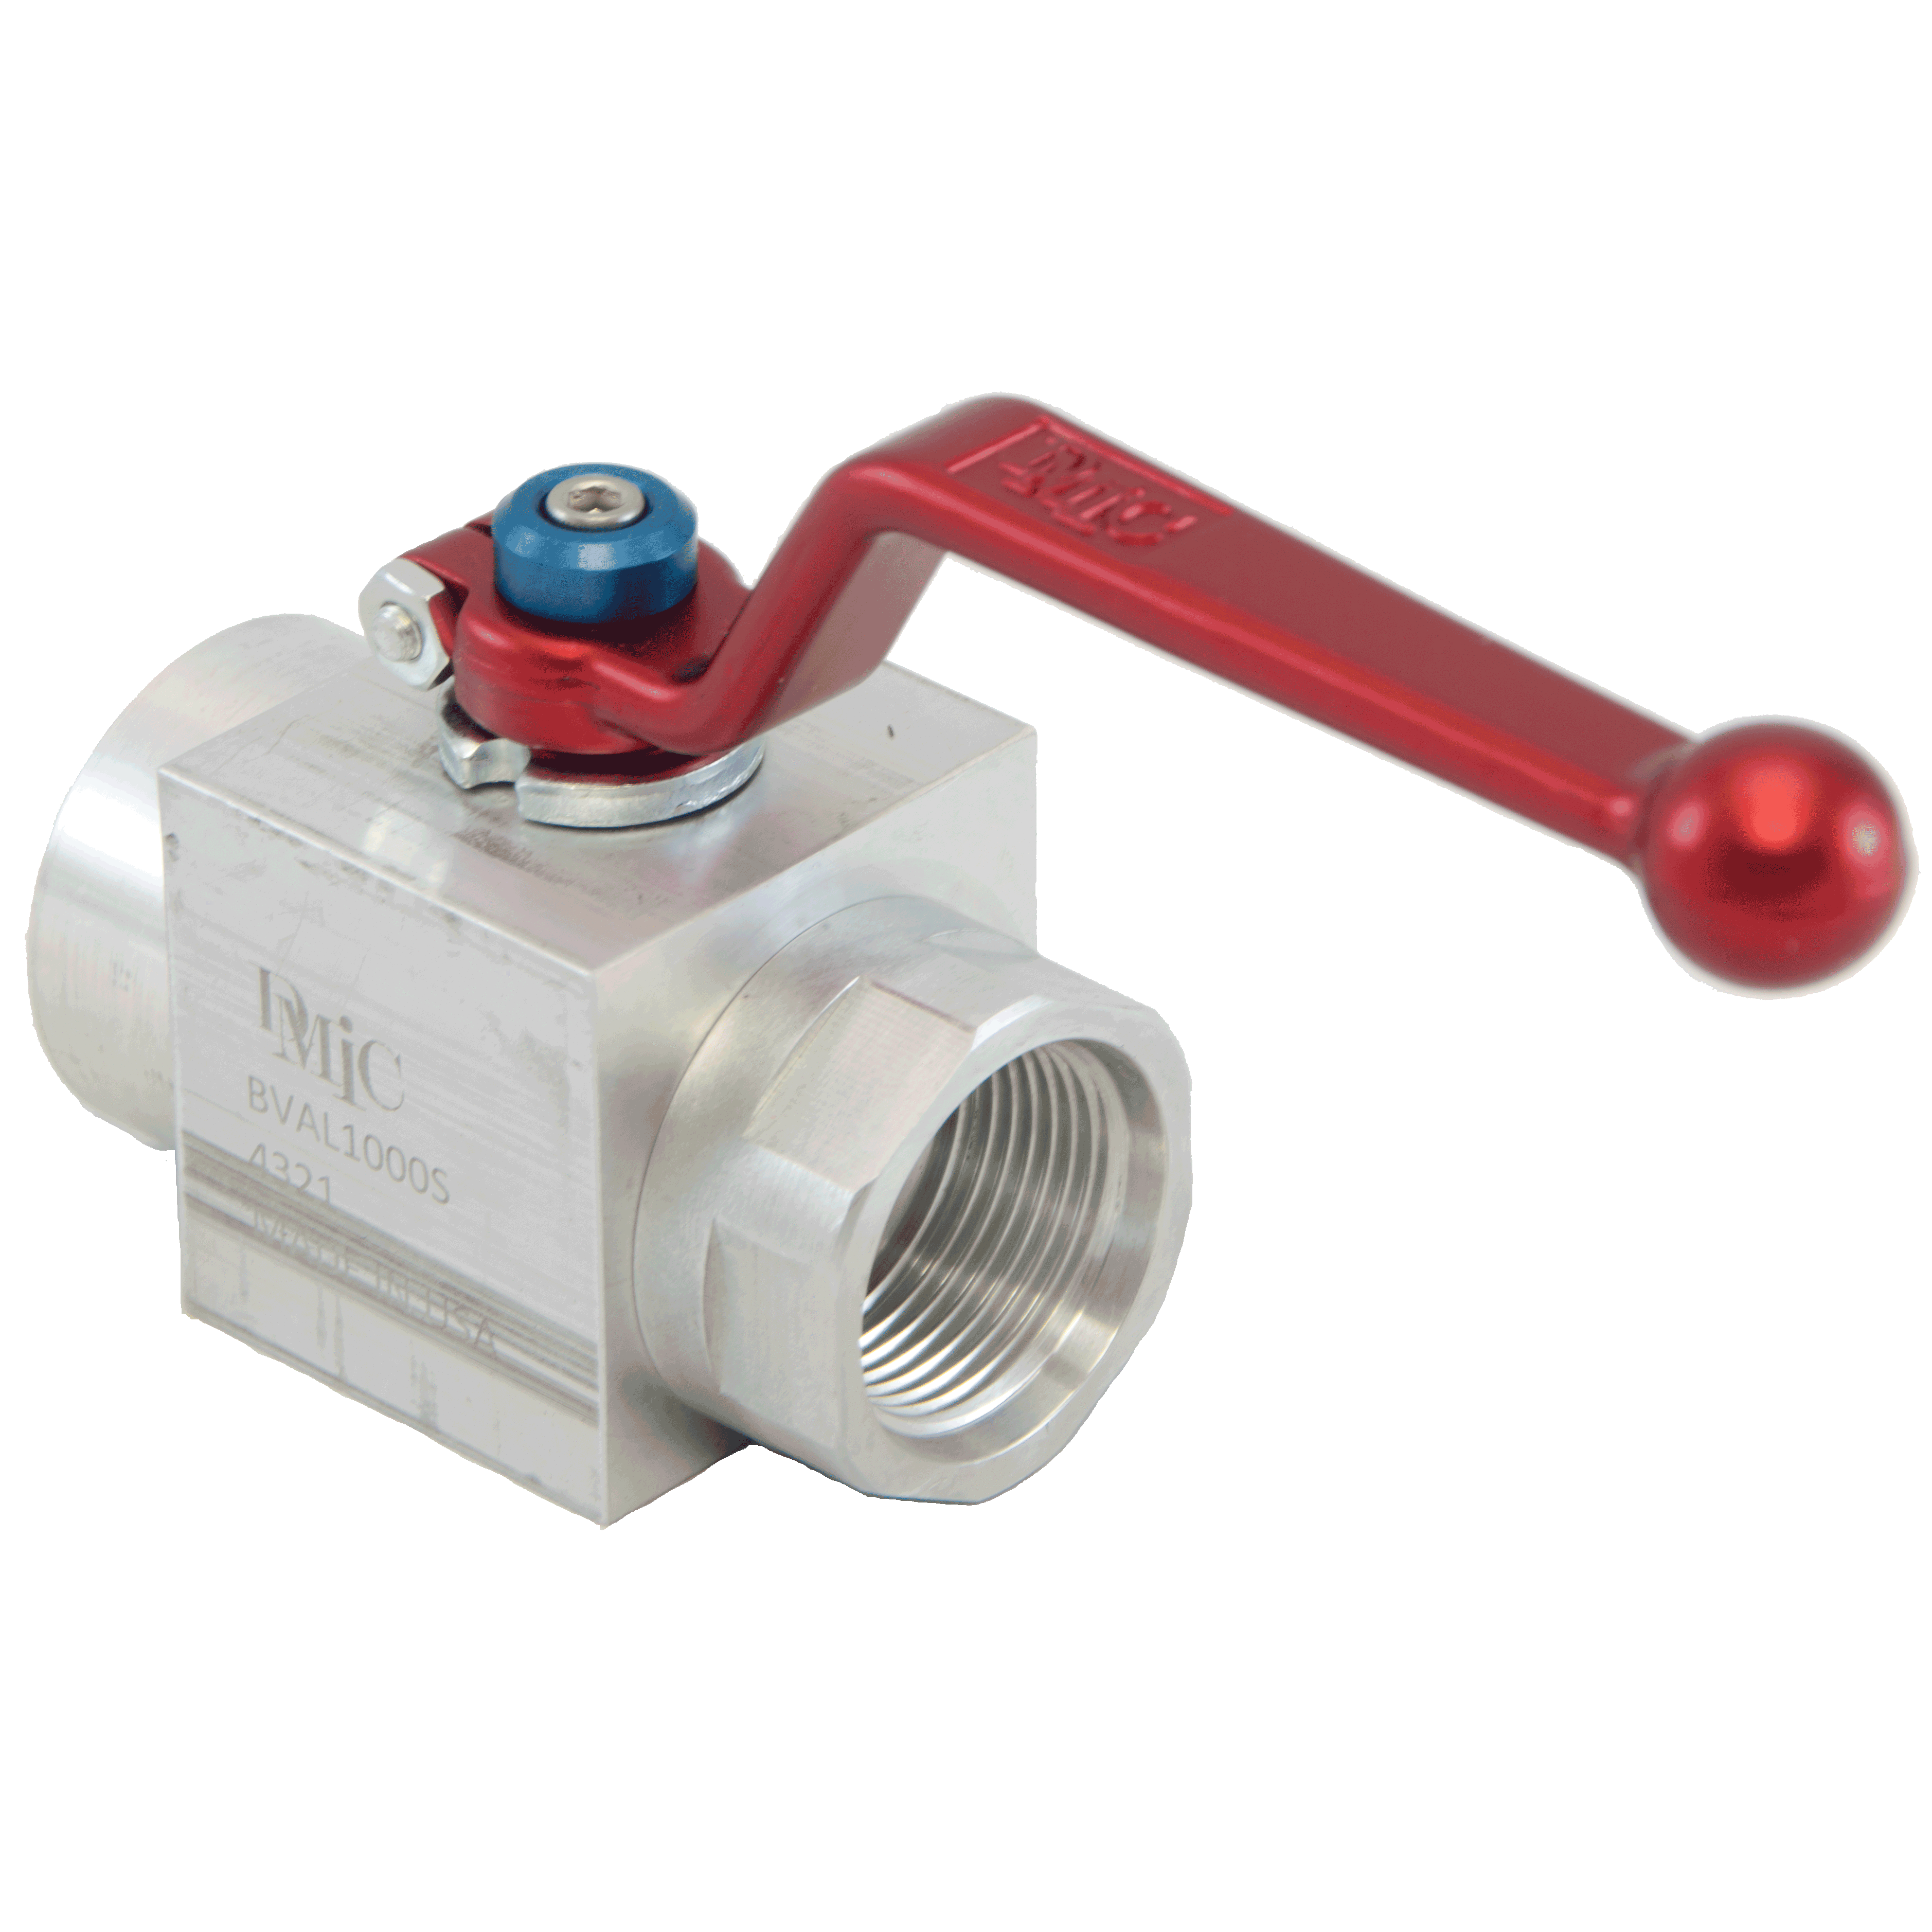 BVAL-0750S-4321-AZZN : DMIC Suction Ball Valve, #12 SAE (3/4), Aluminum, 600psi, Two-Way, with Locking Handle